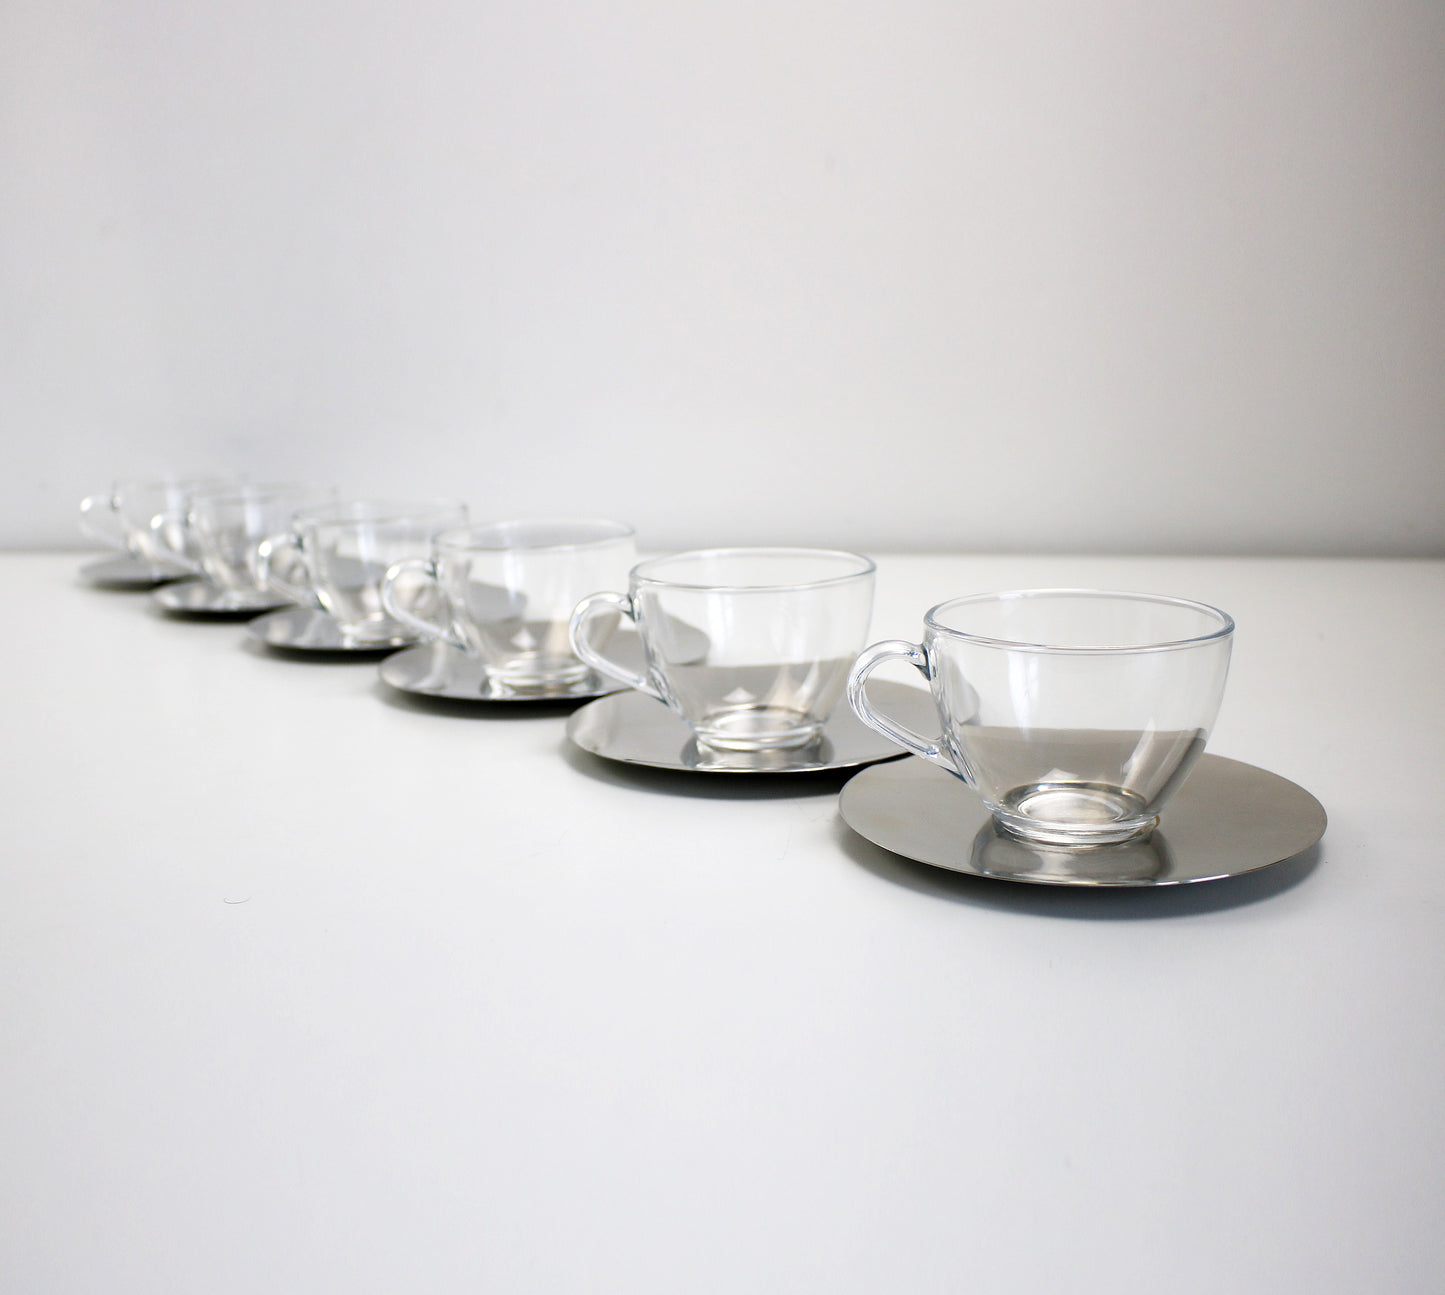 Set of 6 preloved Bodum glass teacups large coffee cups with stainless steel saucers